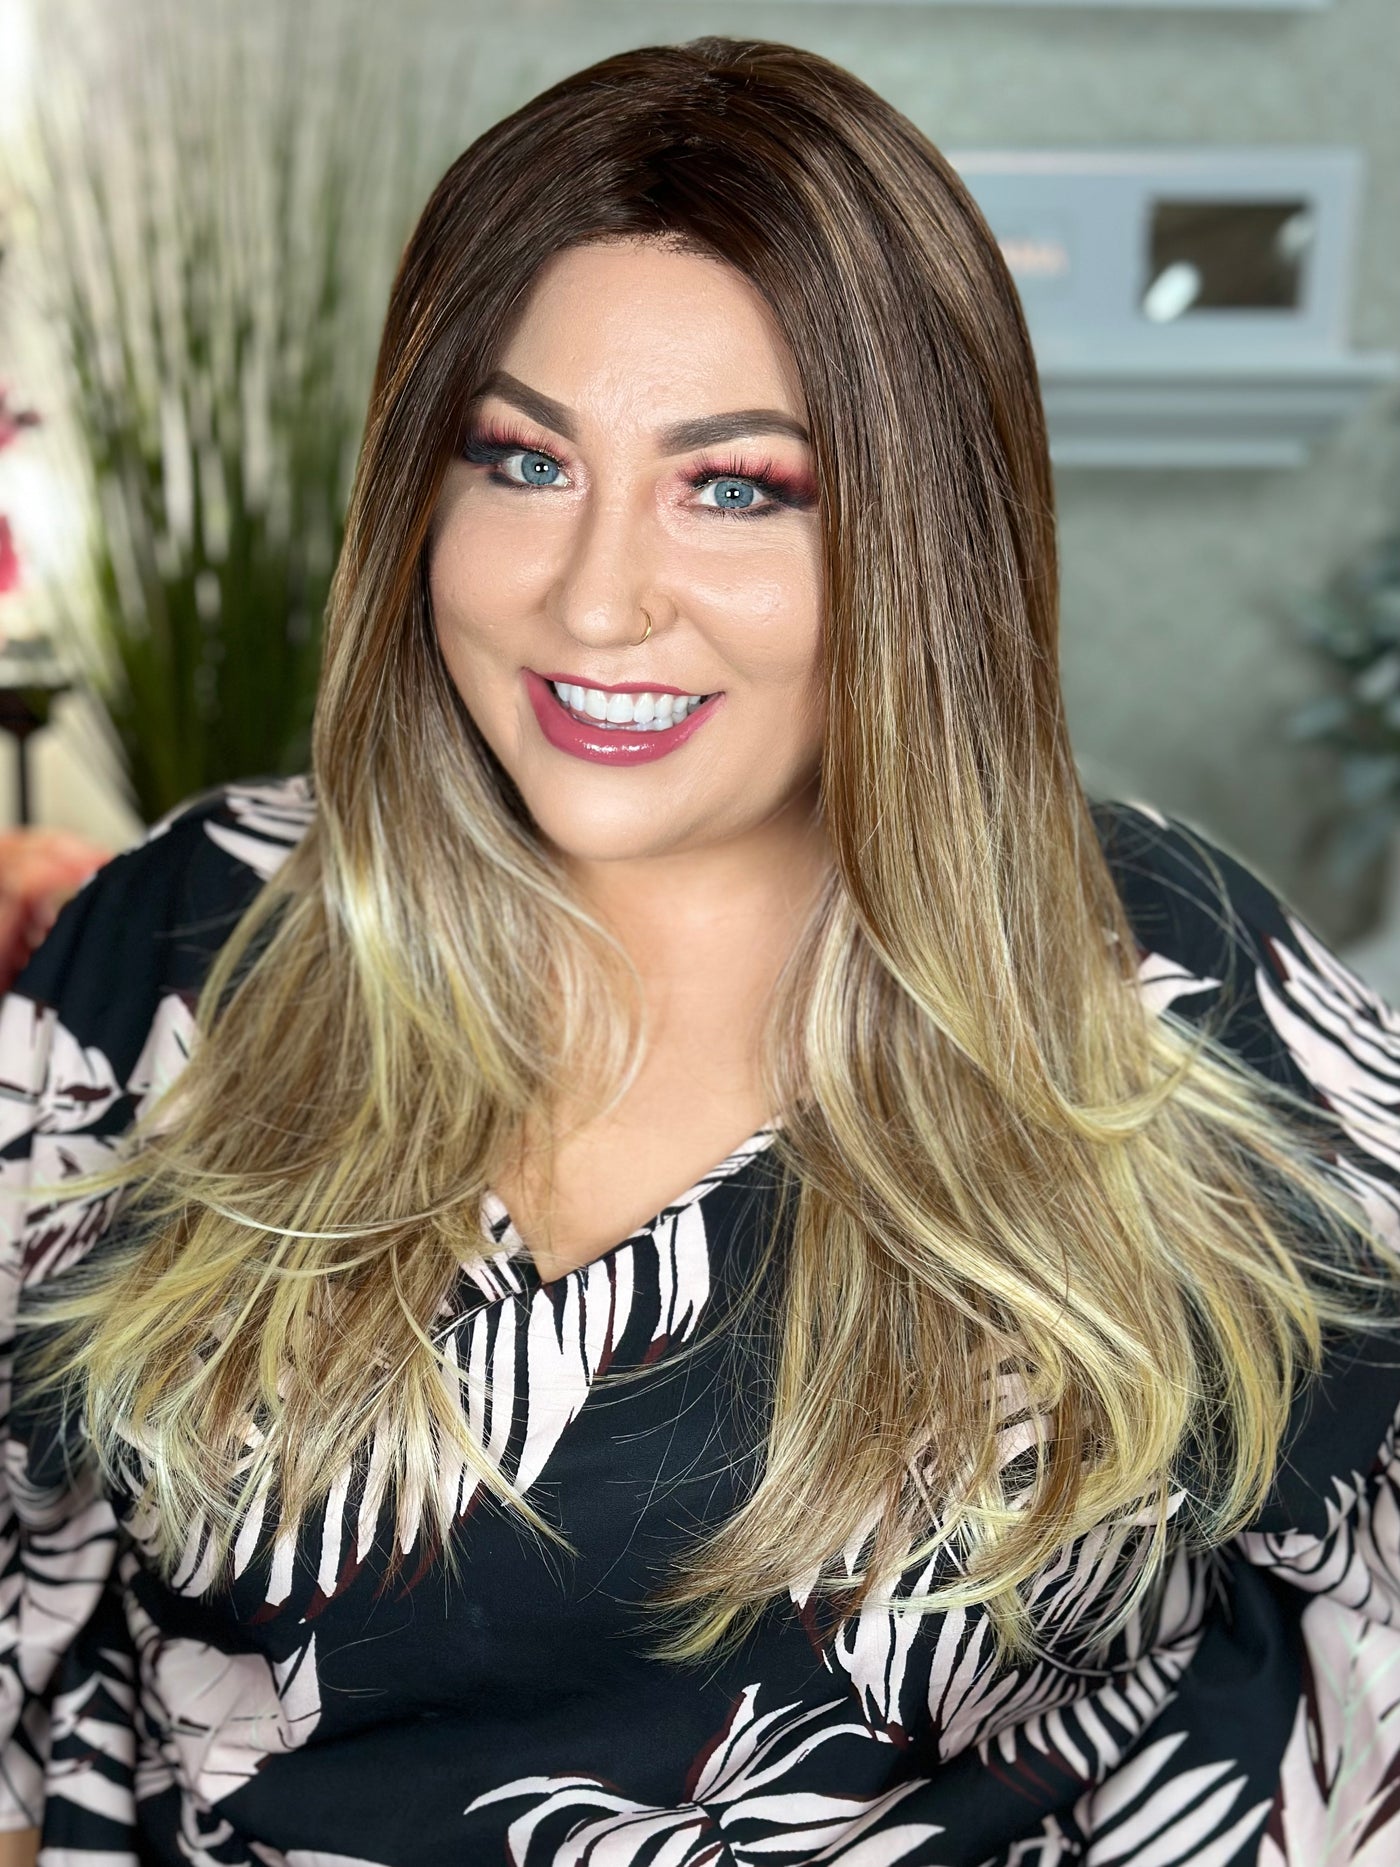 QUEEN OF HEARTS - Ombre Almond Blonde